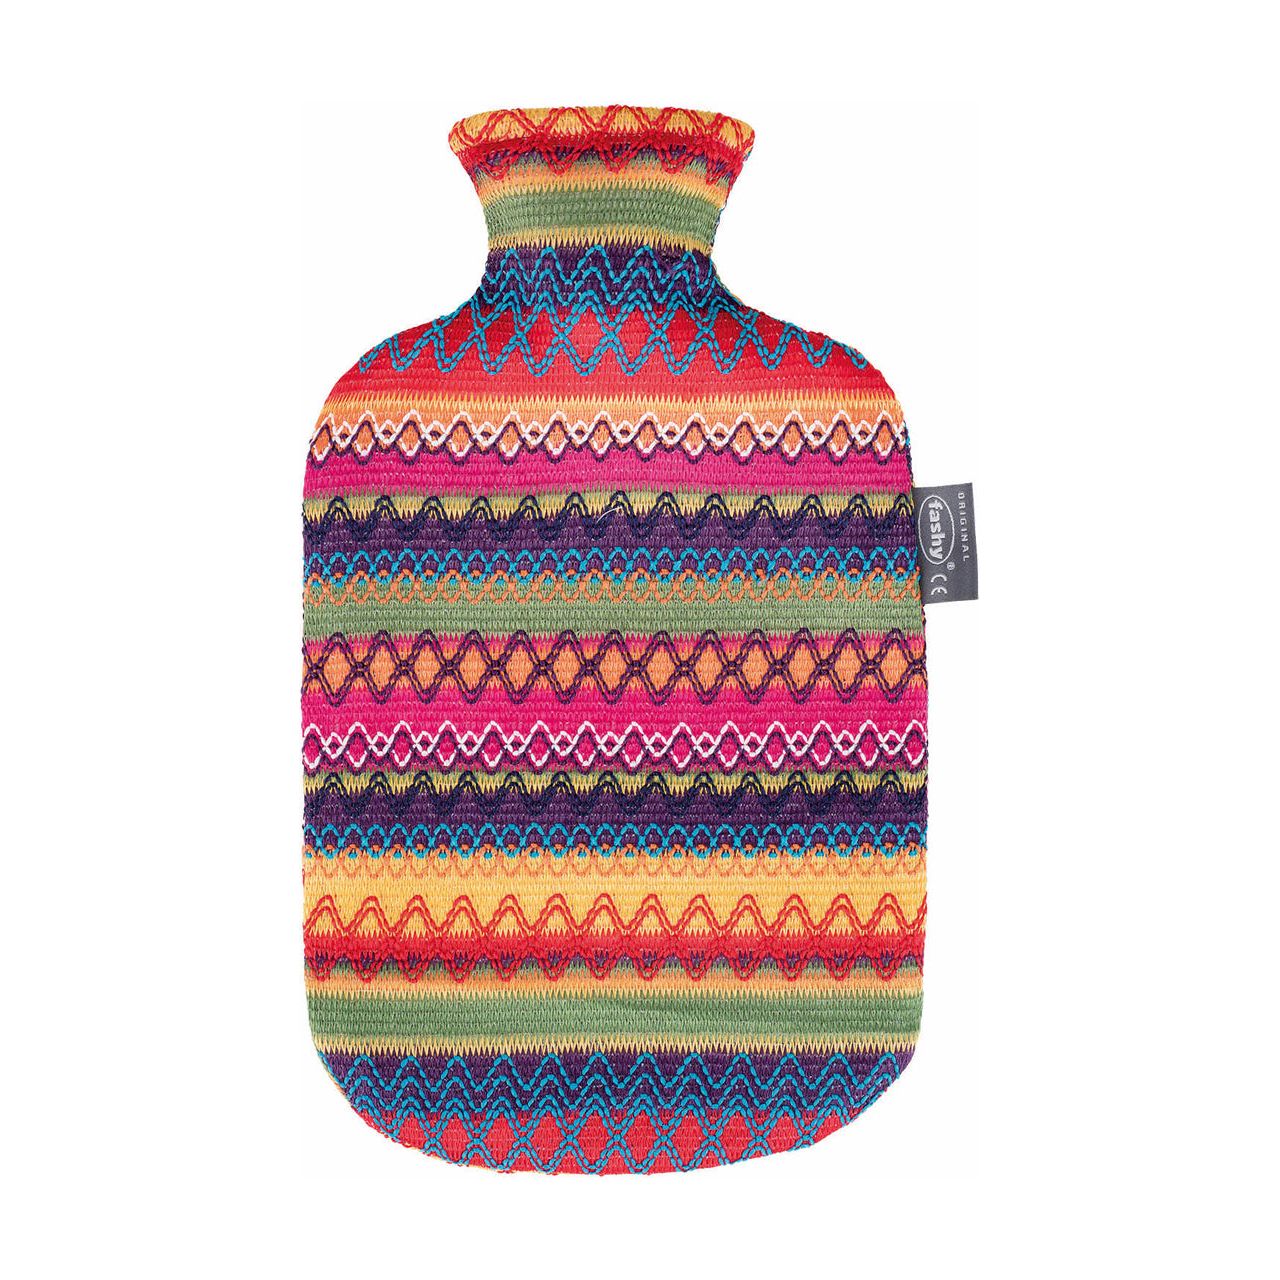 2 Litre Fashy Hot Water Bottle with Peruvian Design Knitted Cover